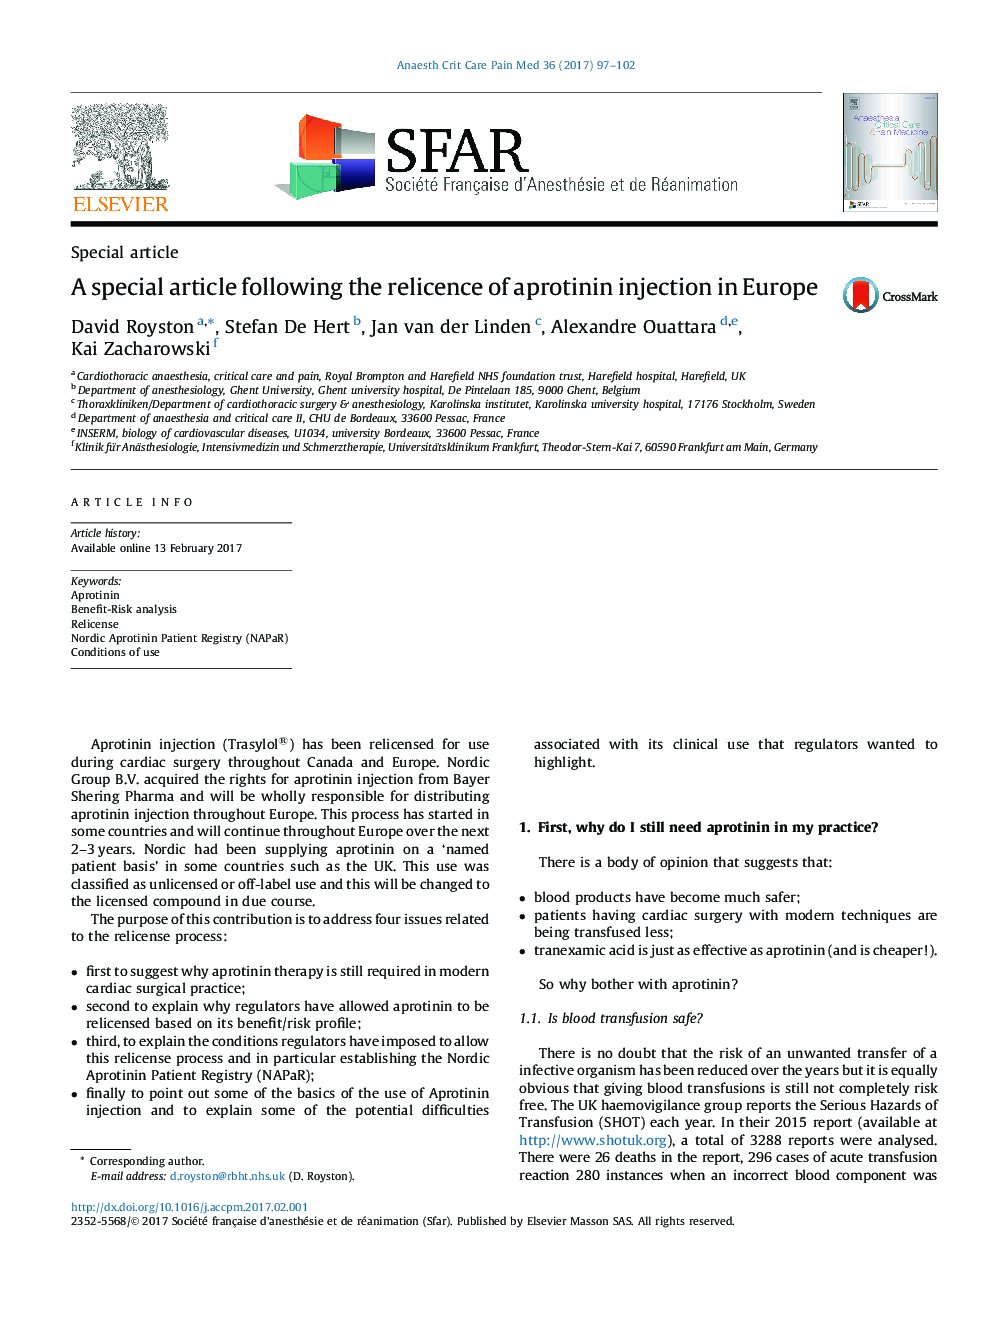 A special article following the relicence of aprotinin injection in Europe